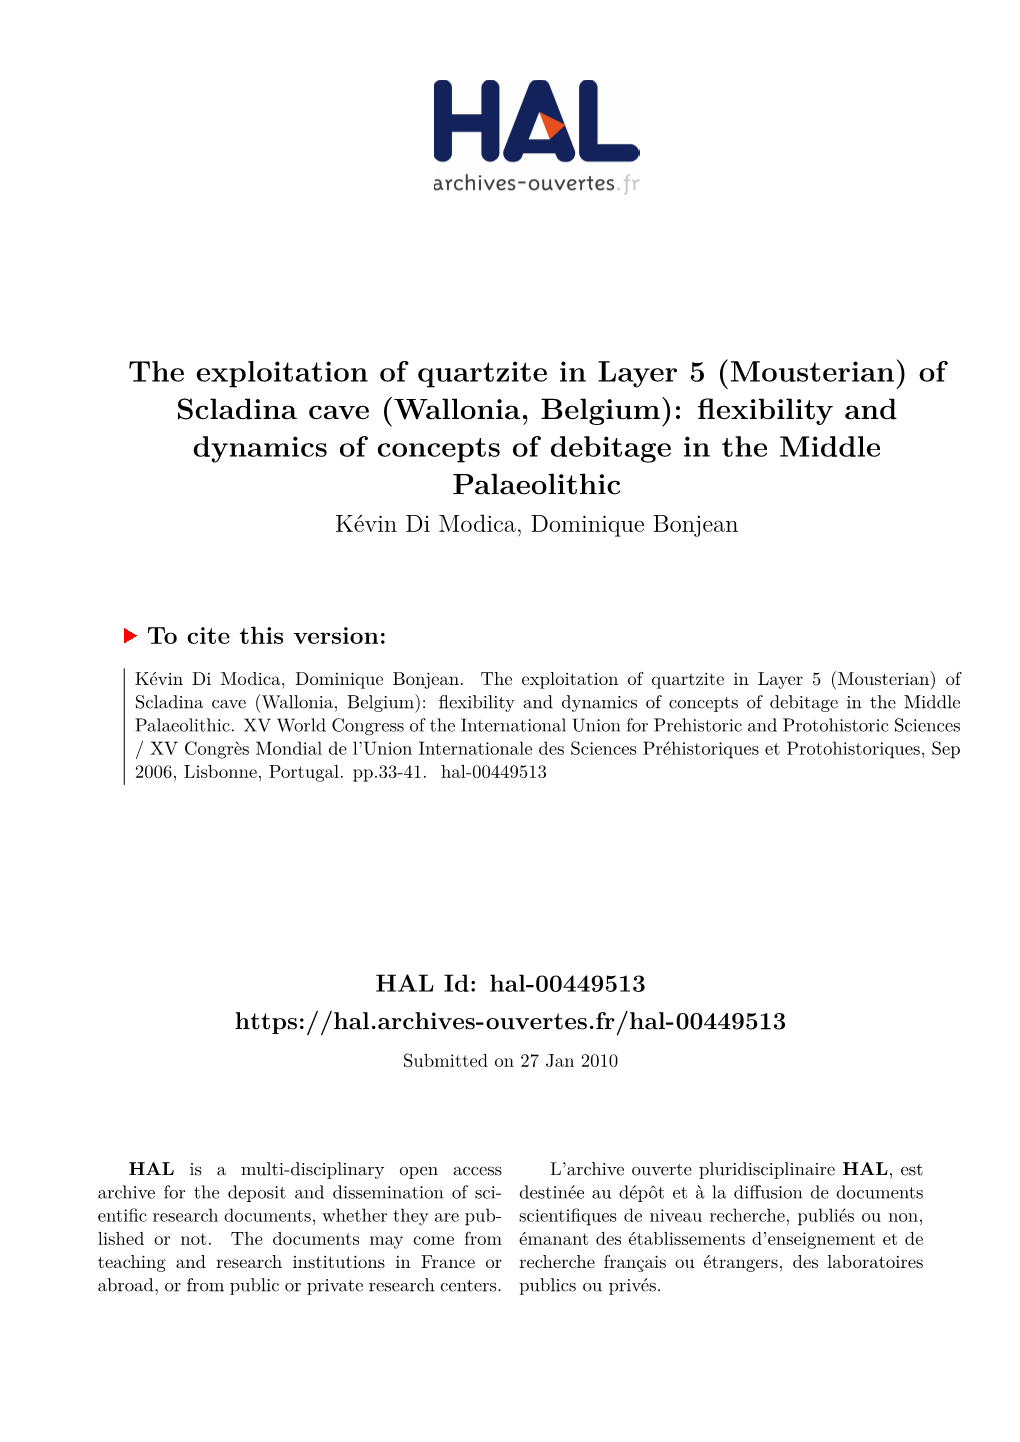 (Mousterian) of Scladina Cave (Wallonia, Belgium): Flexibility and Dynamics of Concepts of Debitage in the Middle Palaeolithic Kévin Di Modica, Dominique Bonjean